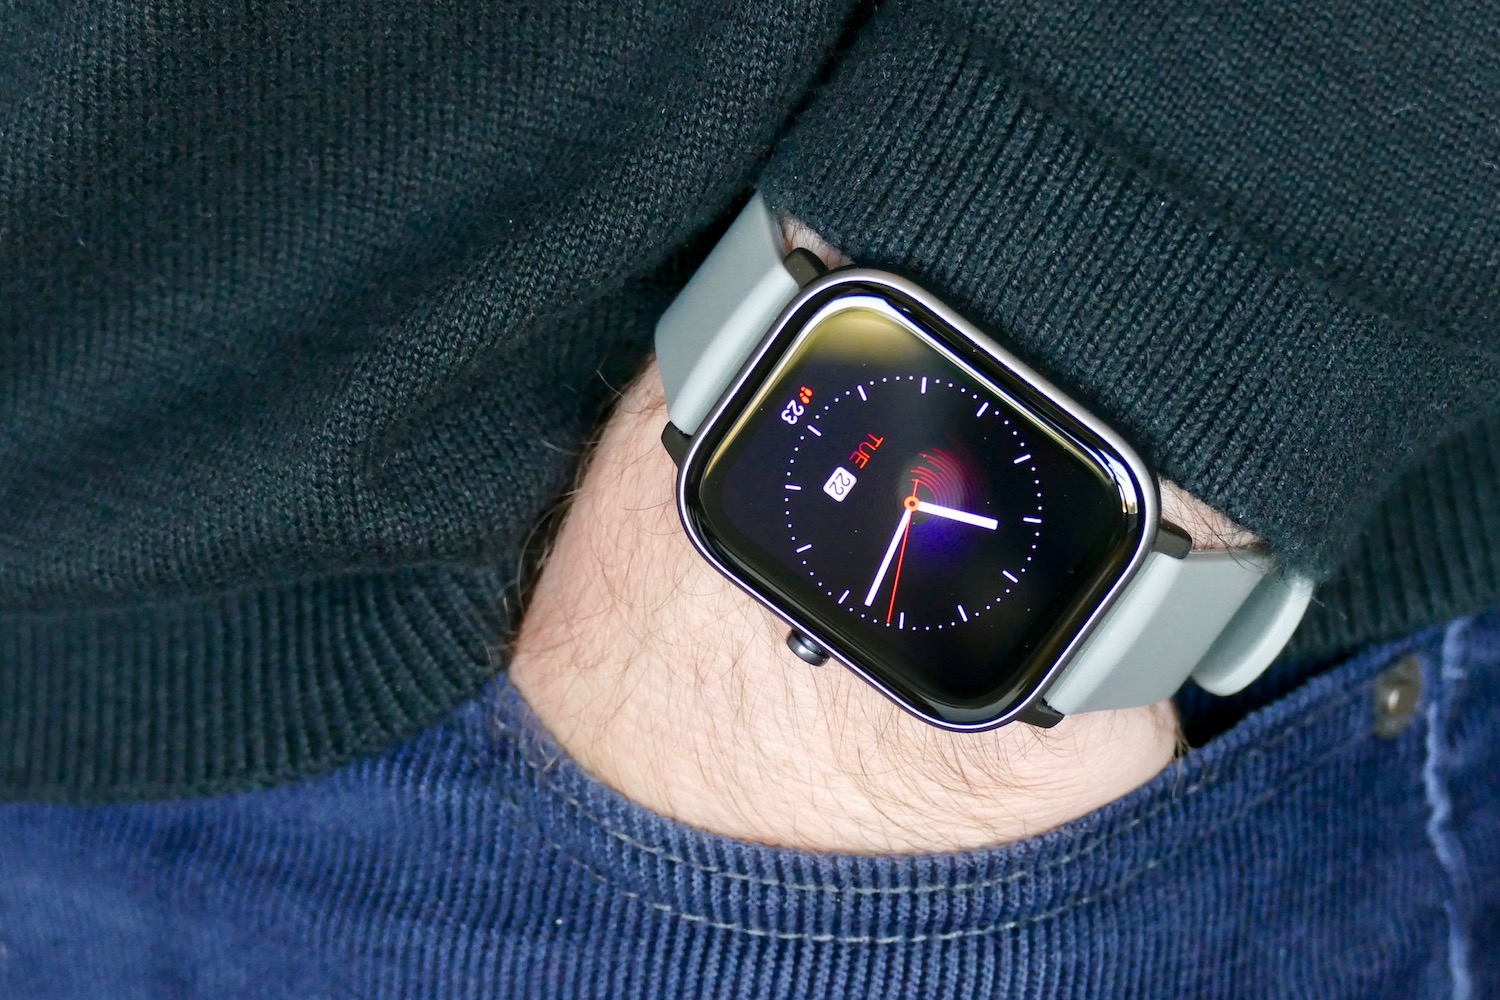 Amazfit GTS Review: Apple Watch Looks, But Not Apple Software